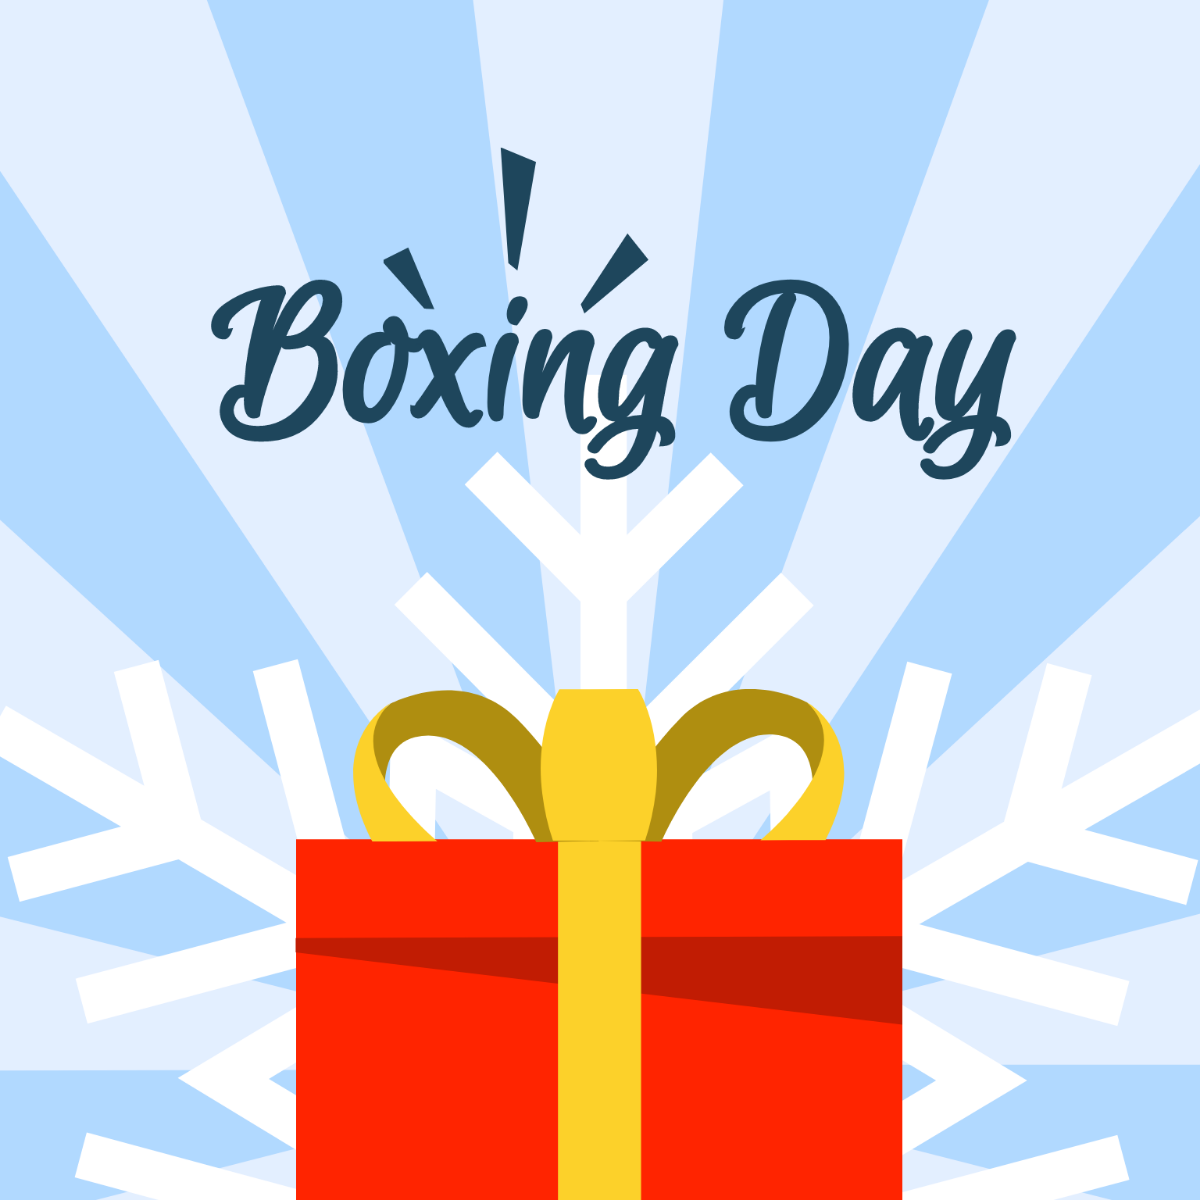 Free Boxing Day Vector Template